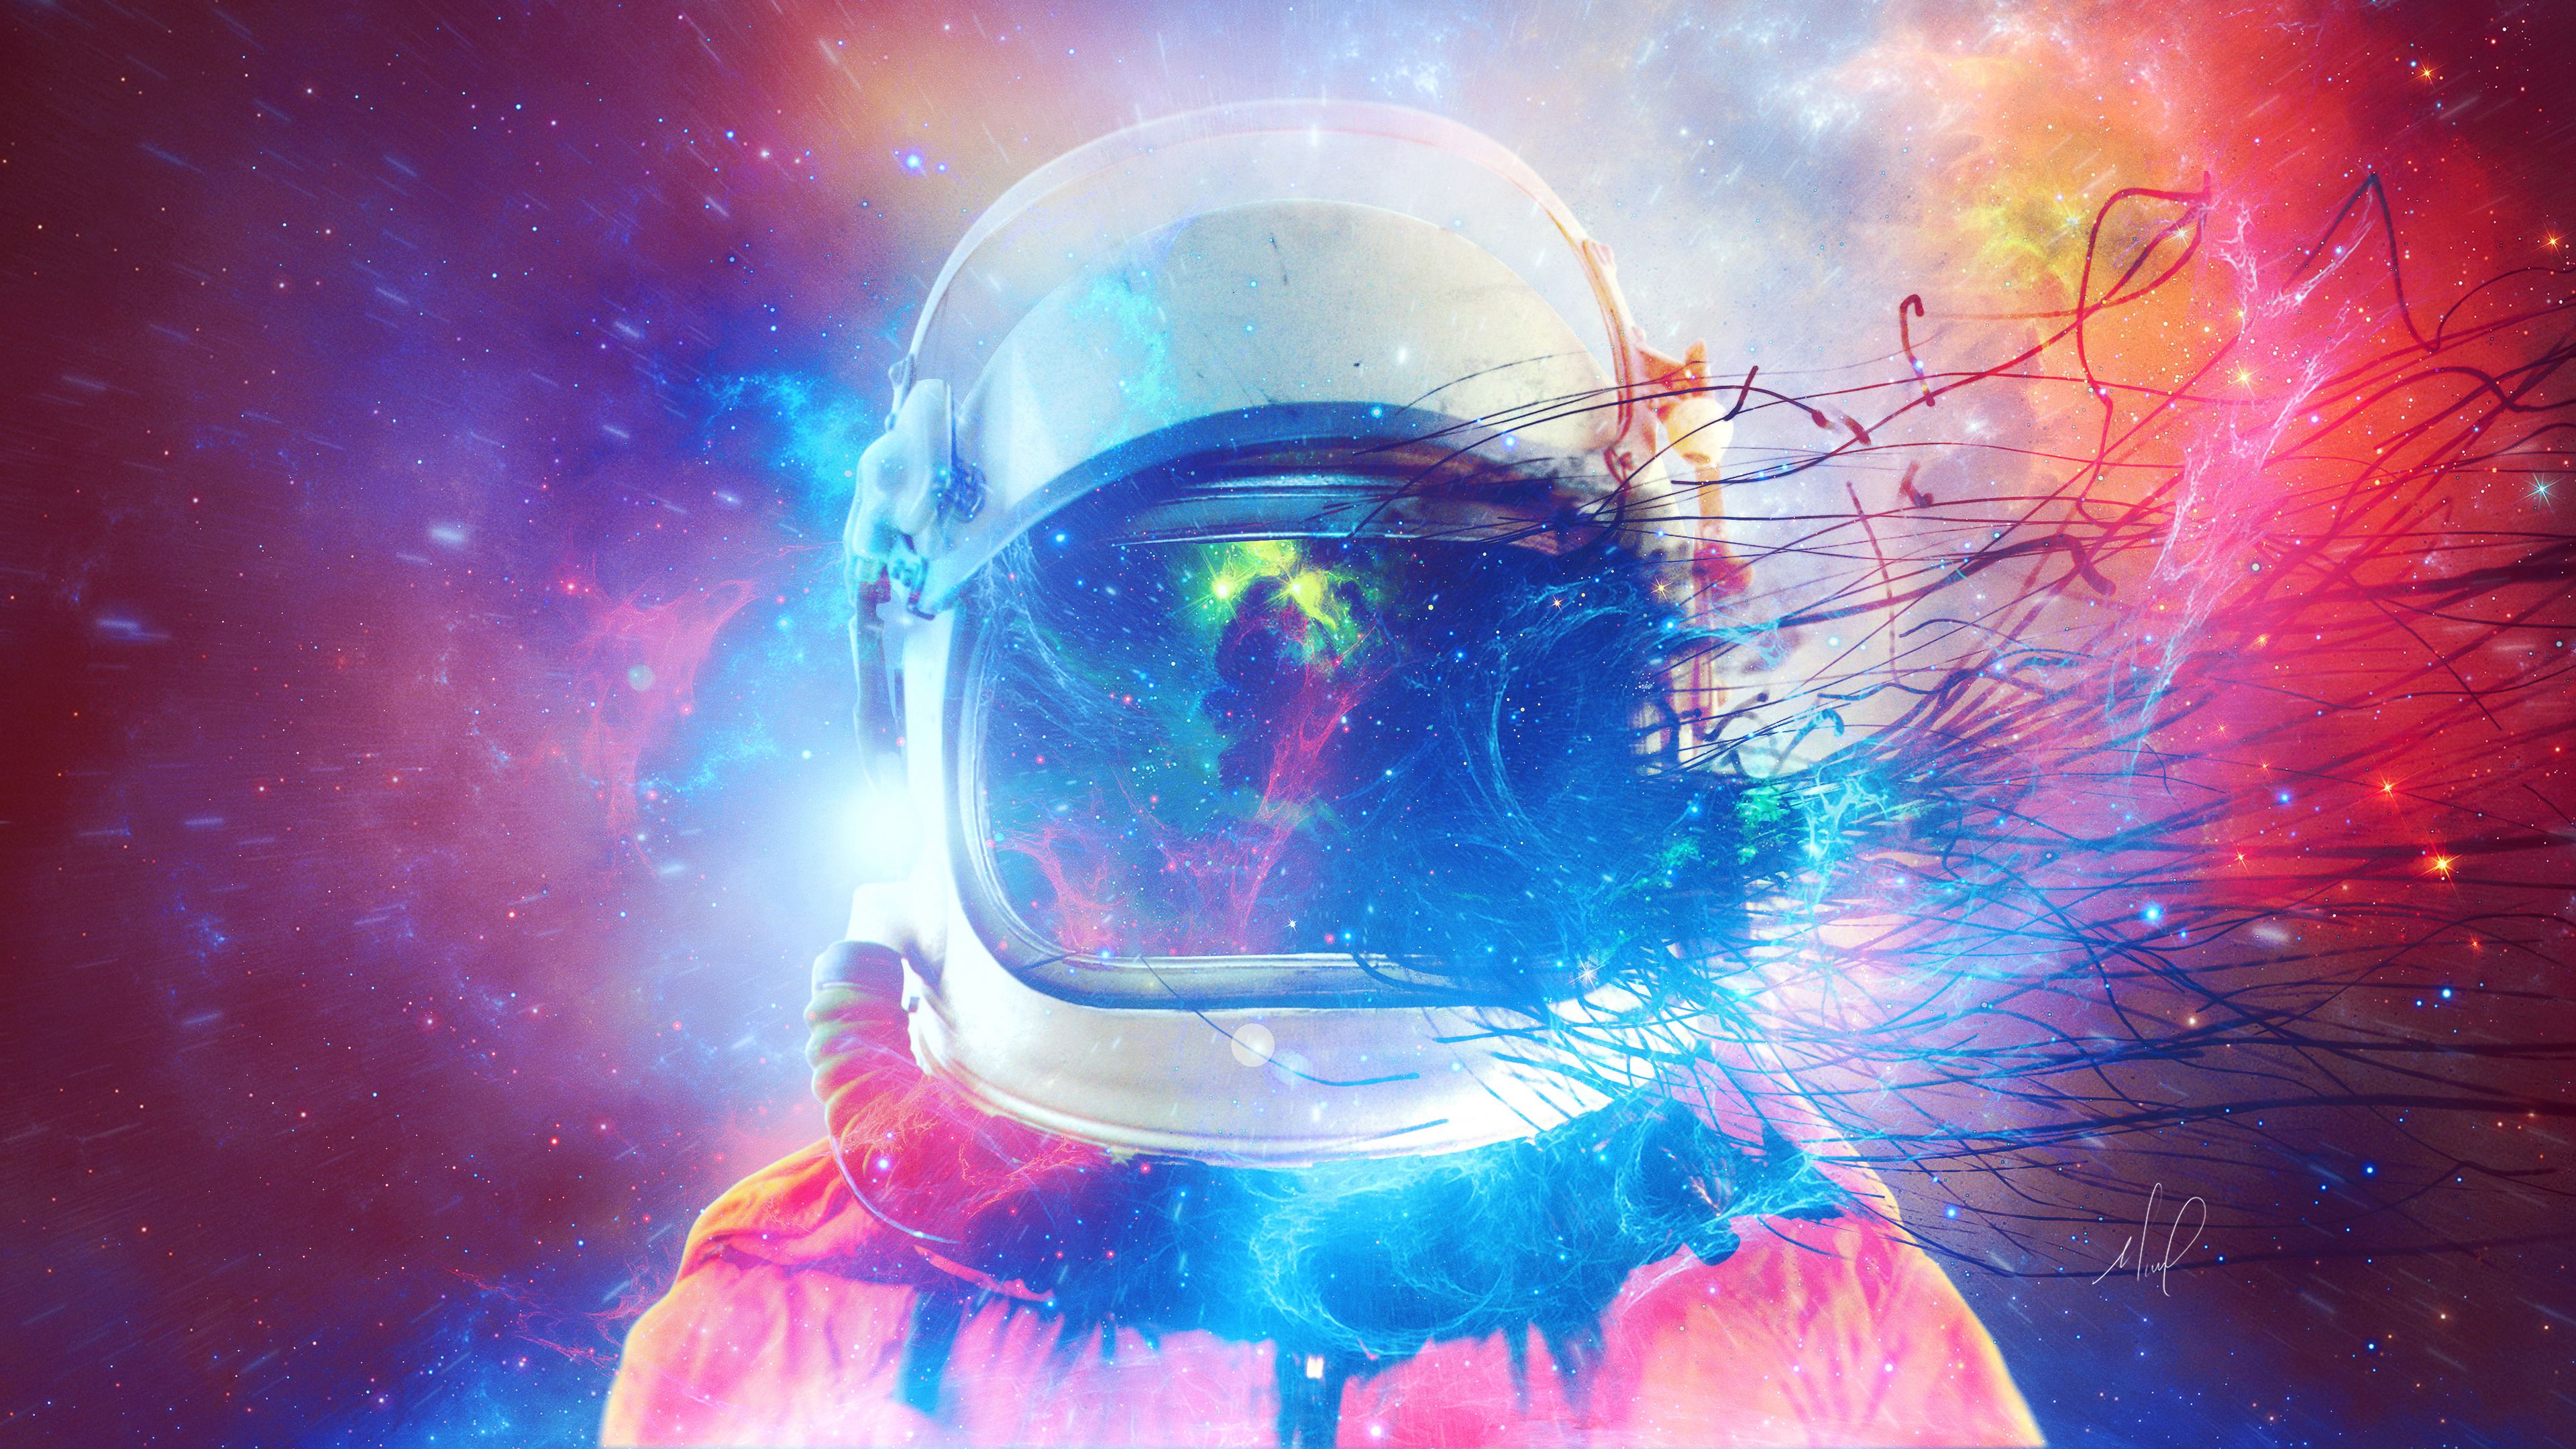 Download Wallpaper 3840x2160 Cosmonaut Space Suit Multicolored Space 4k Uhd 169 Hd Background 4789